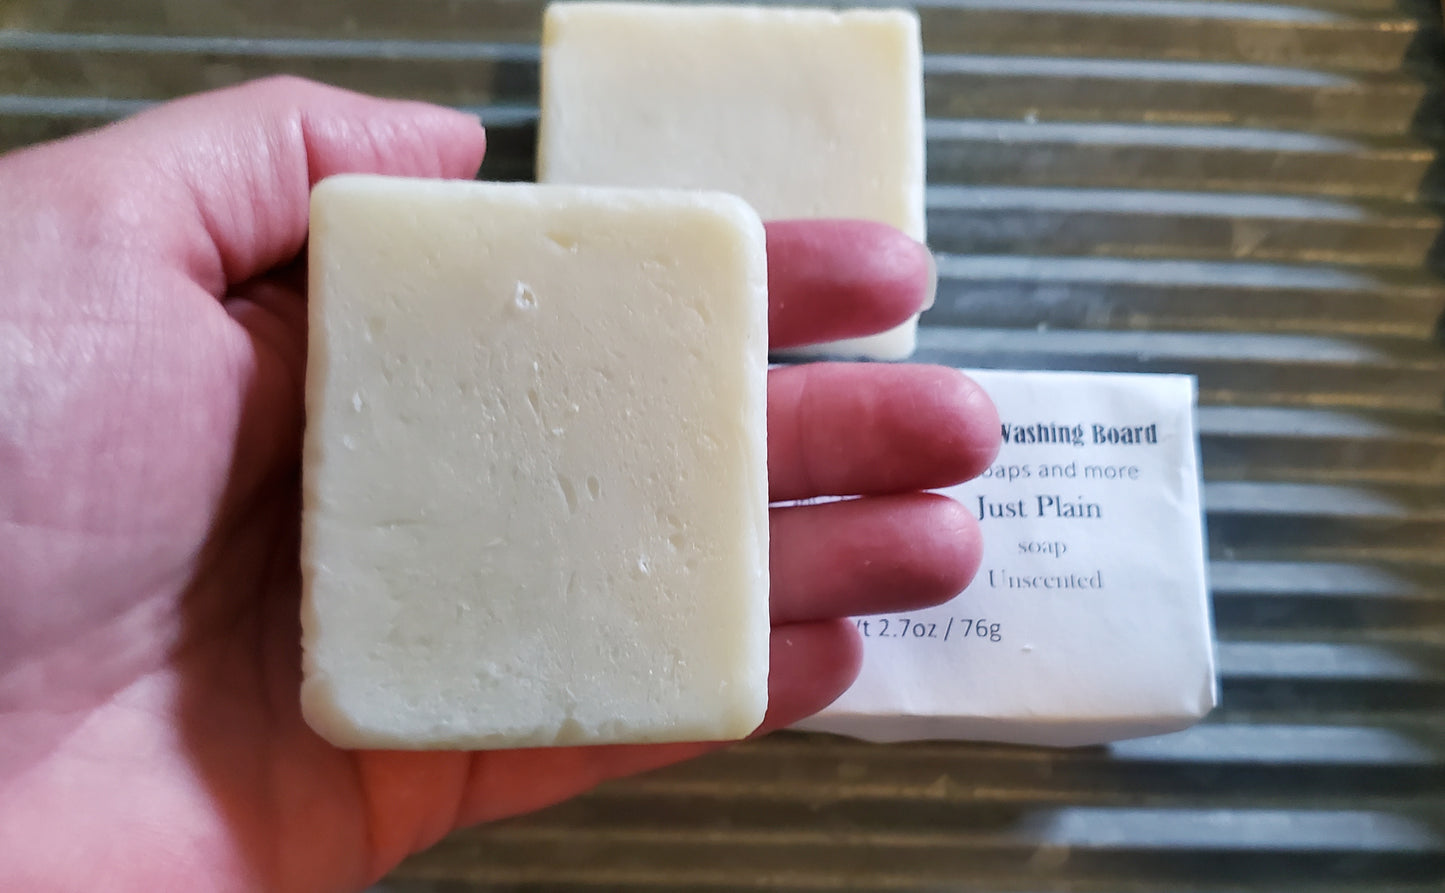 Just Plain Soap bar shown in a woman's hand. 